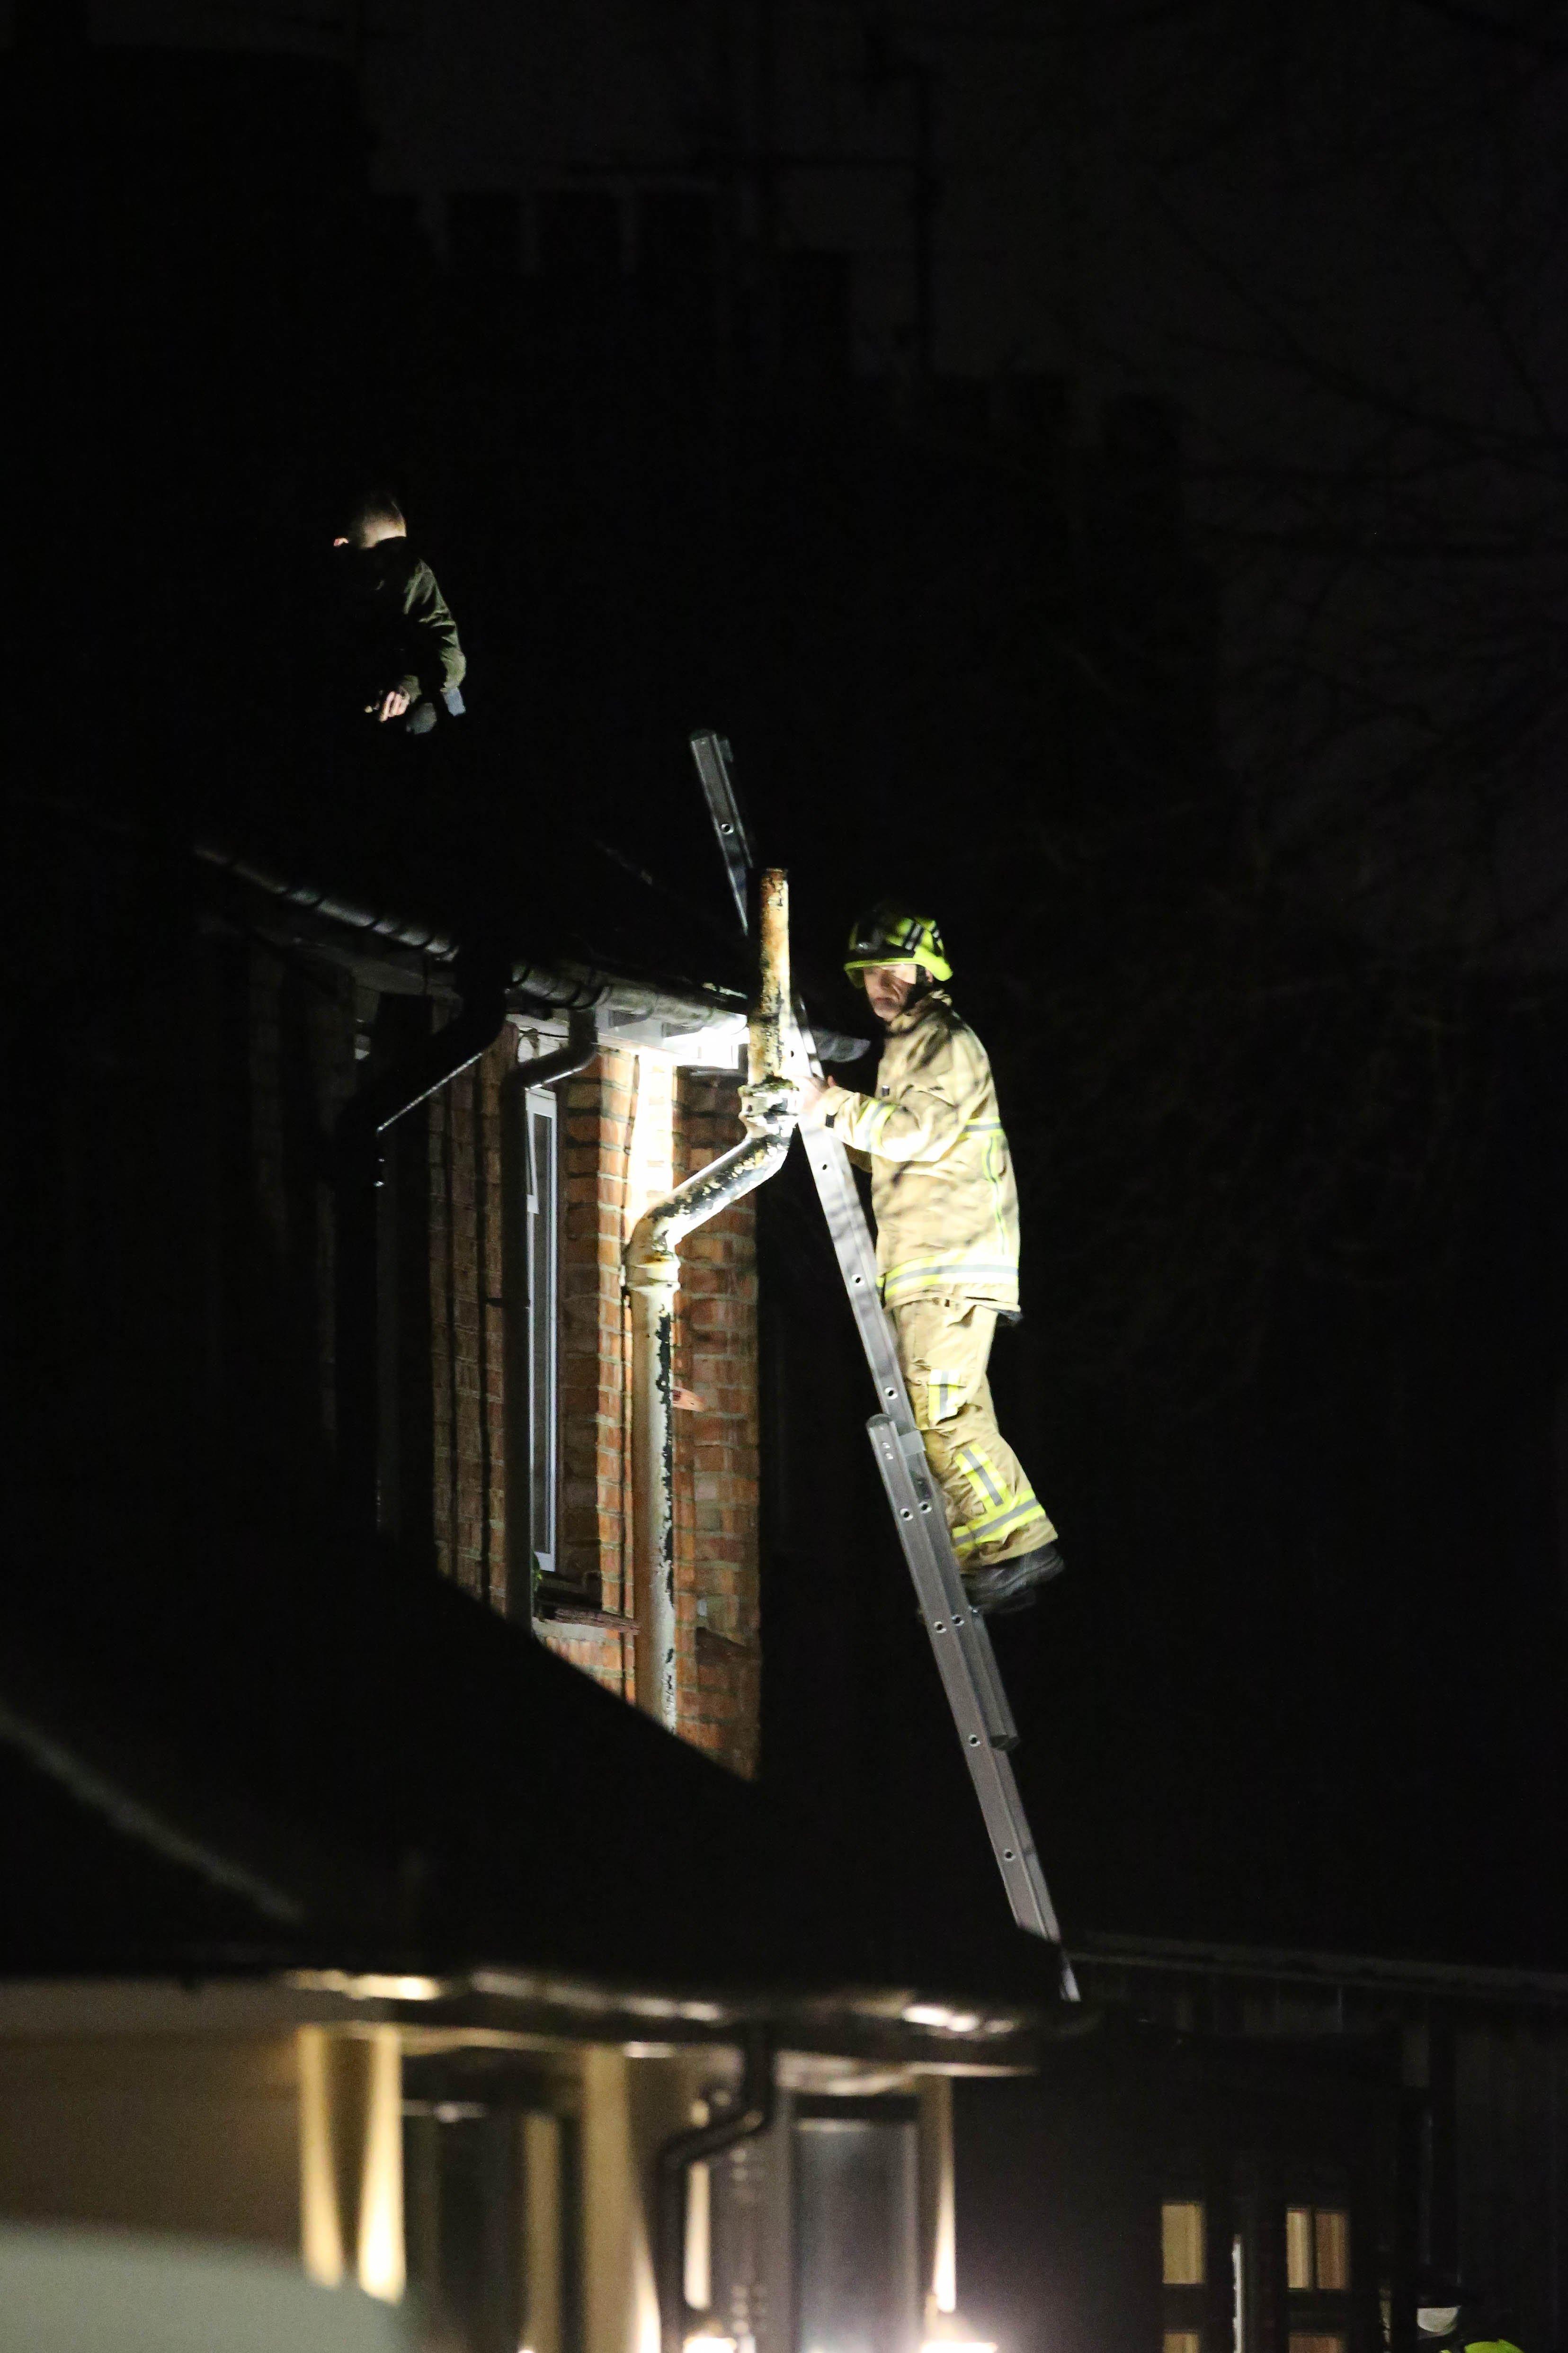 A firefighter scales the building